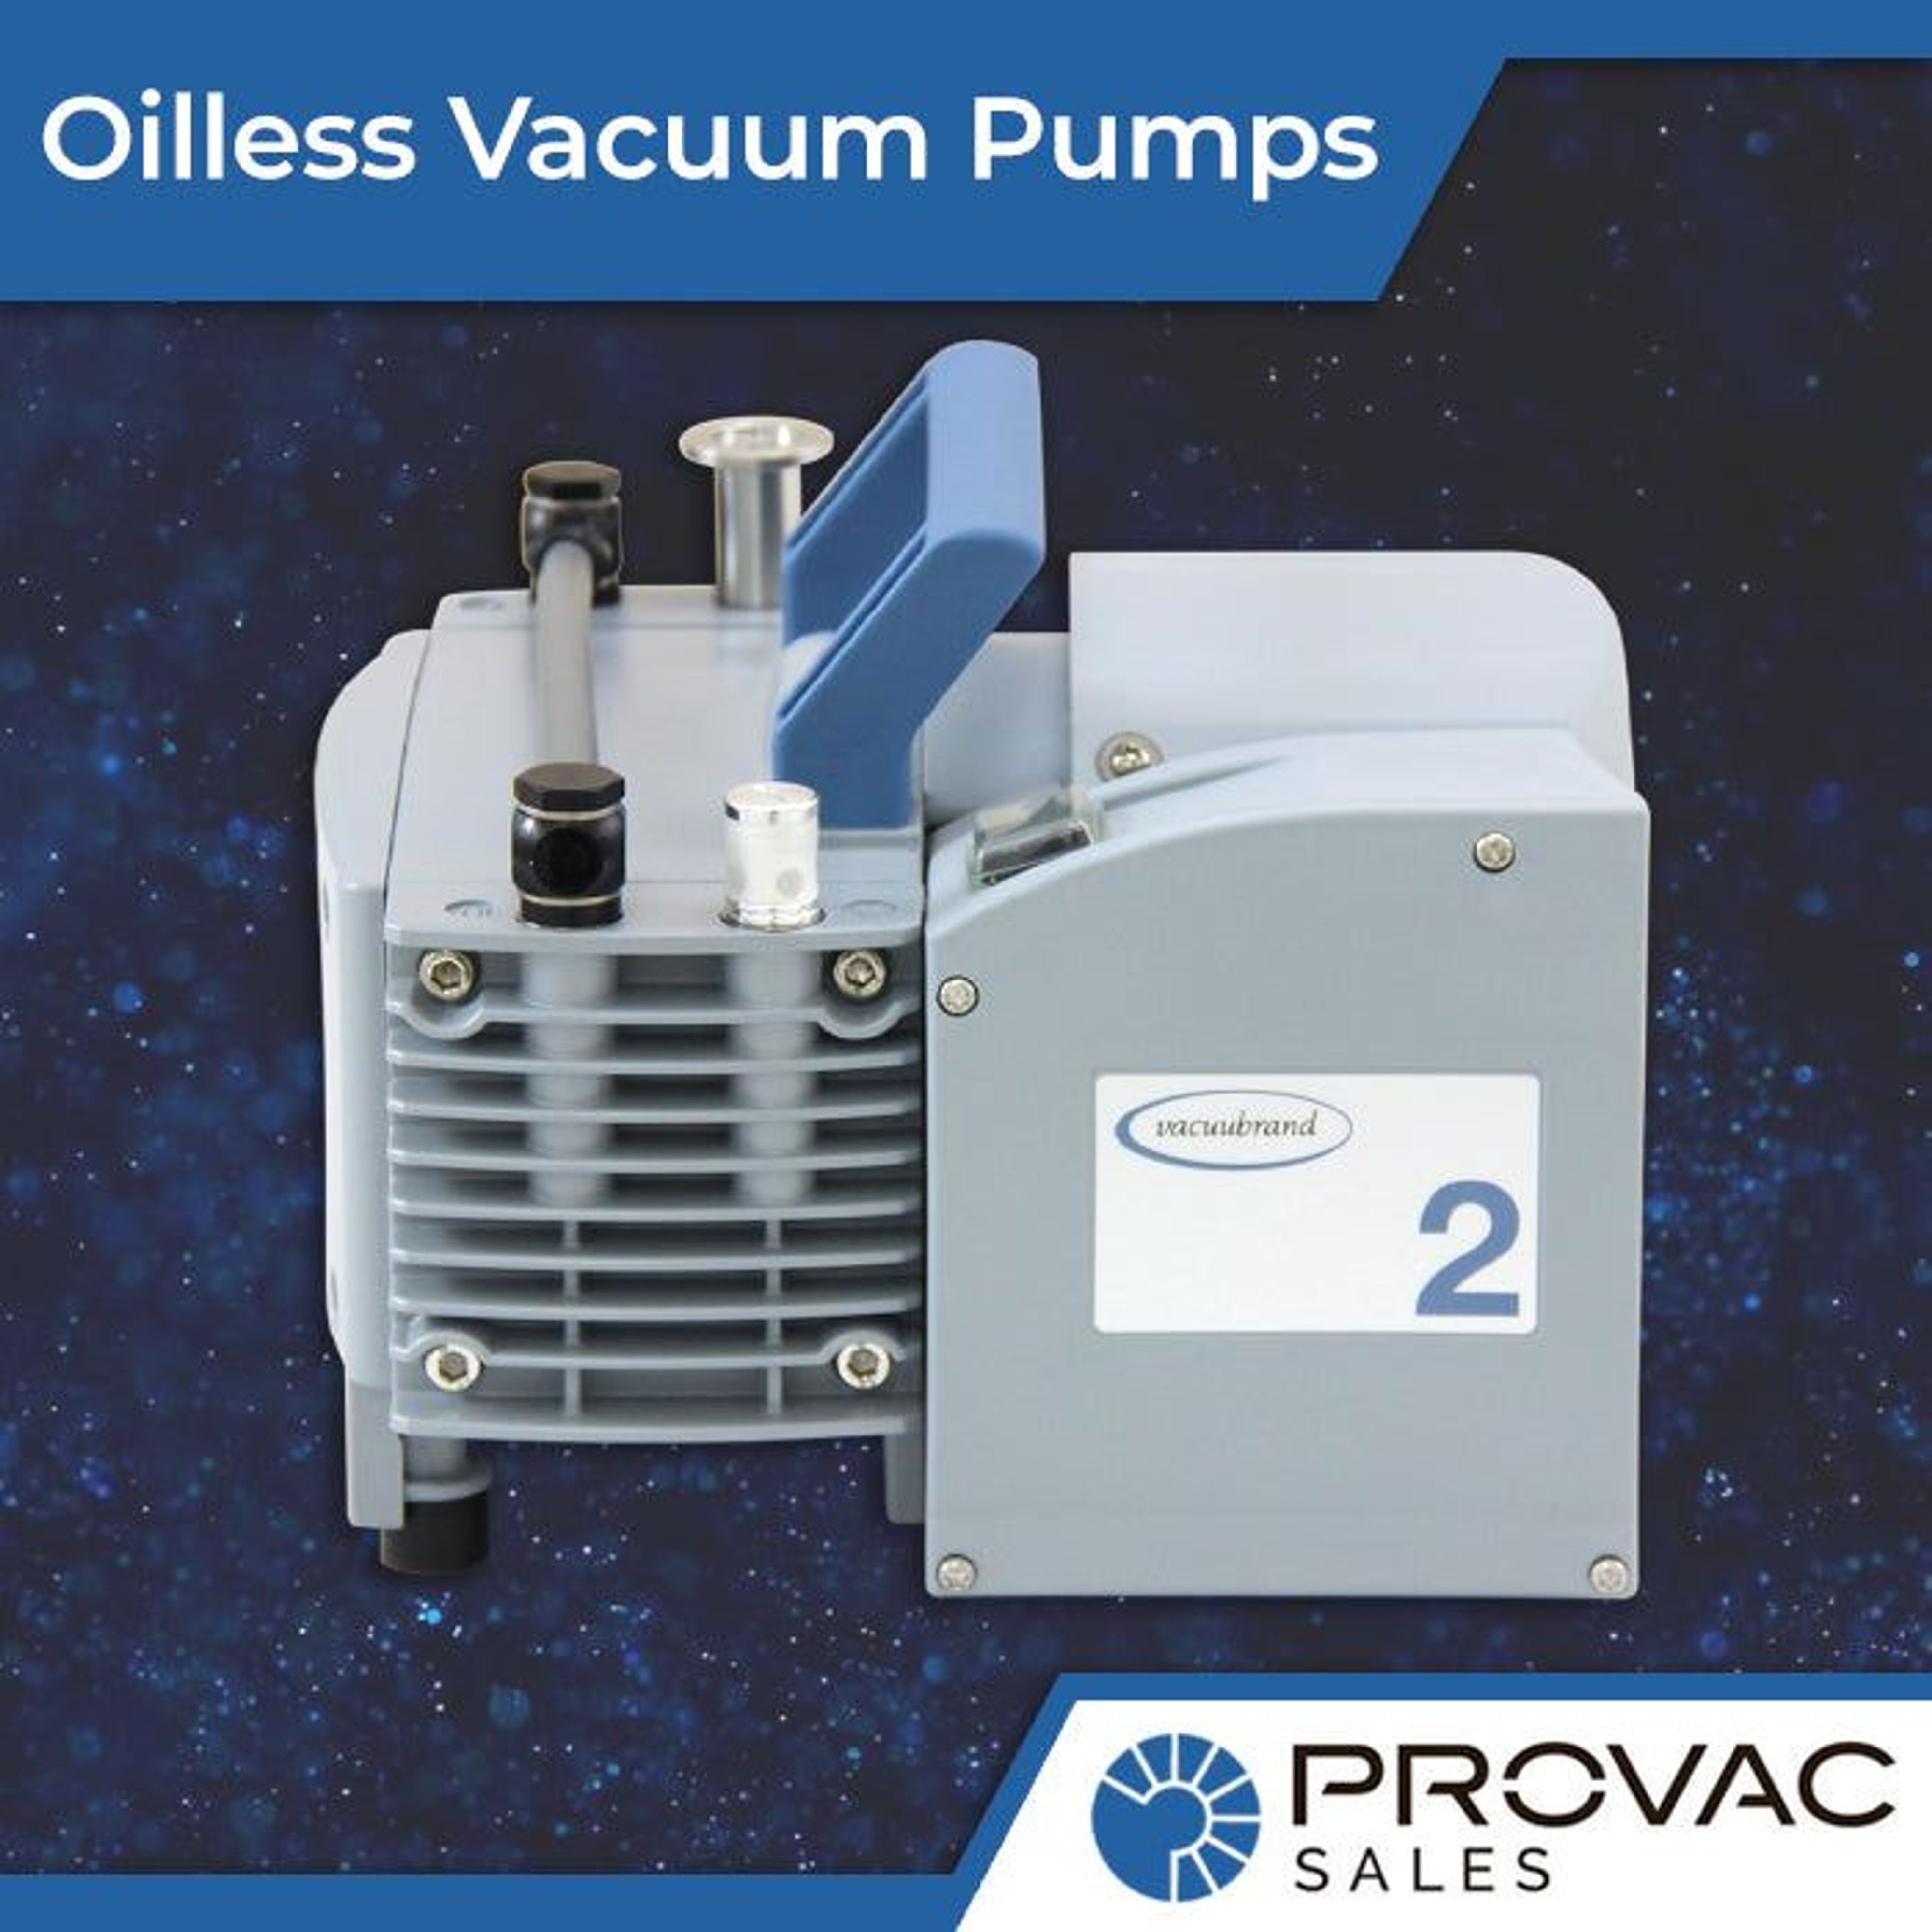 Complete Guide To Oilless Vacuum Pumps Background